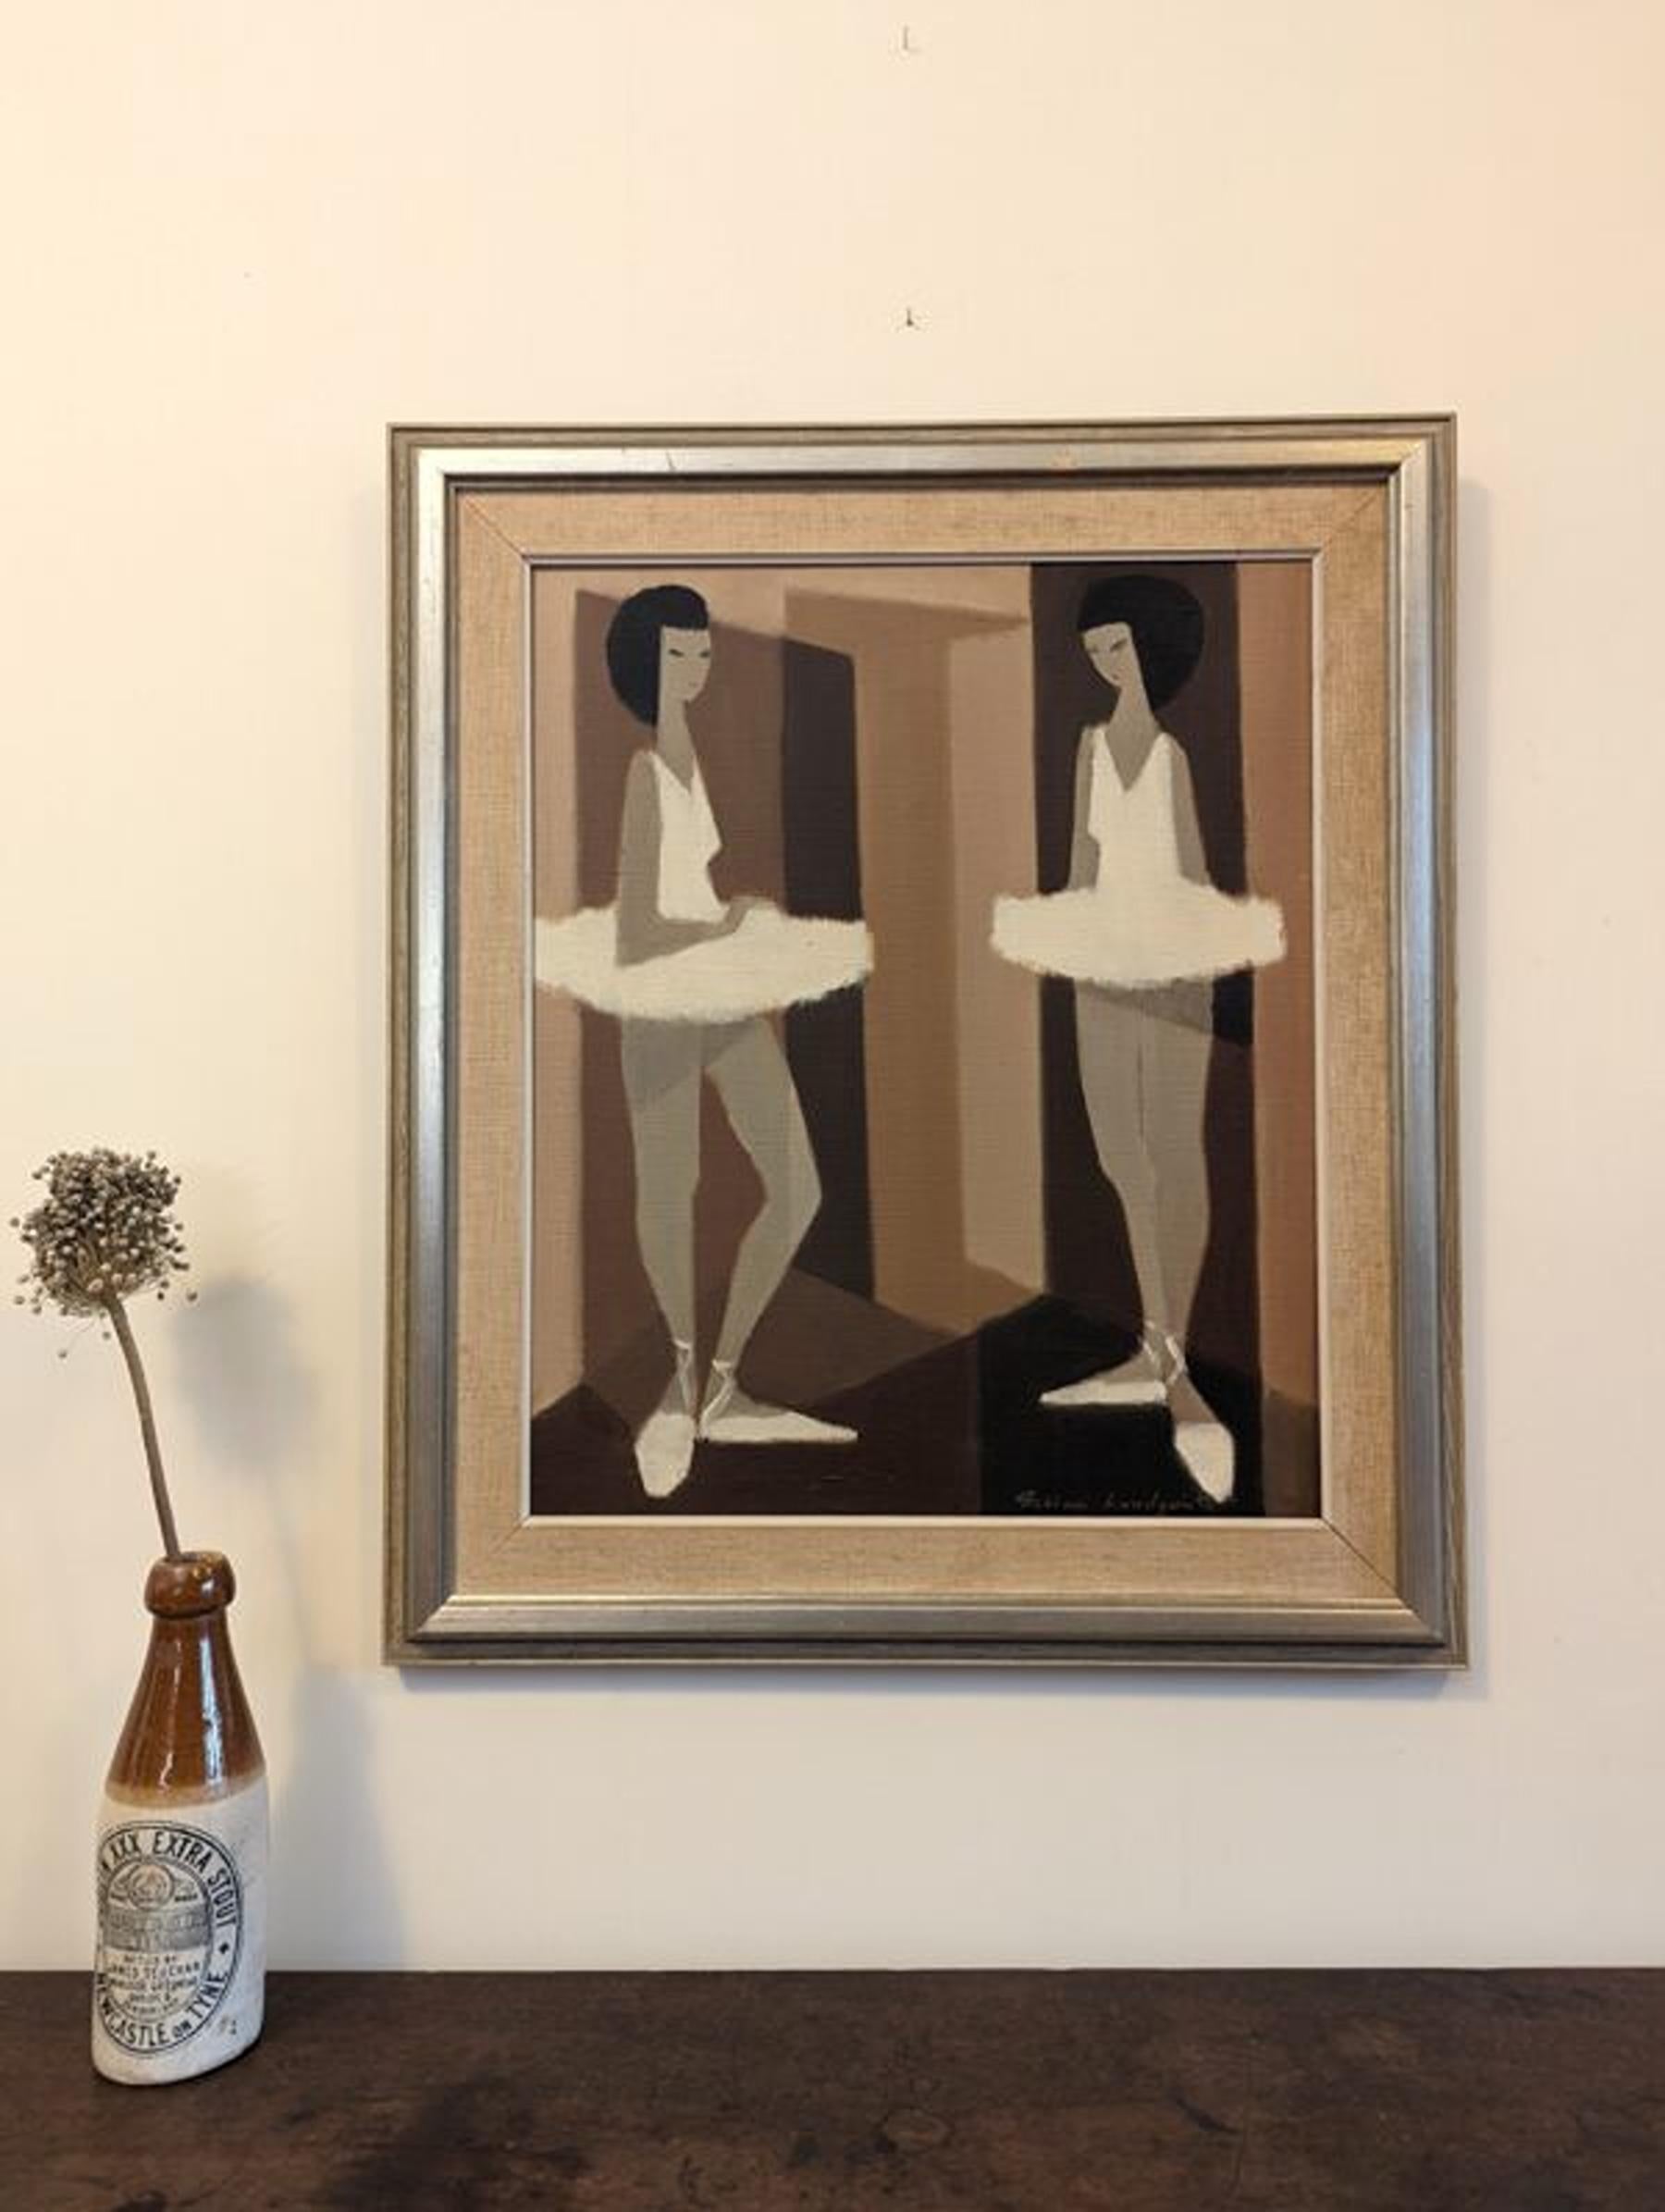 MODERNIST BALLERINAS 
Size: 59.5 x 51 cm (including frame)
Oil on Canvas

An outstanding mid-century figurative composition, executed in oil onto canvas by the established Swedish artist Fabian Lundqvist (1913-1989), whose works have been